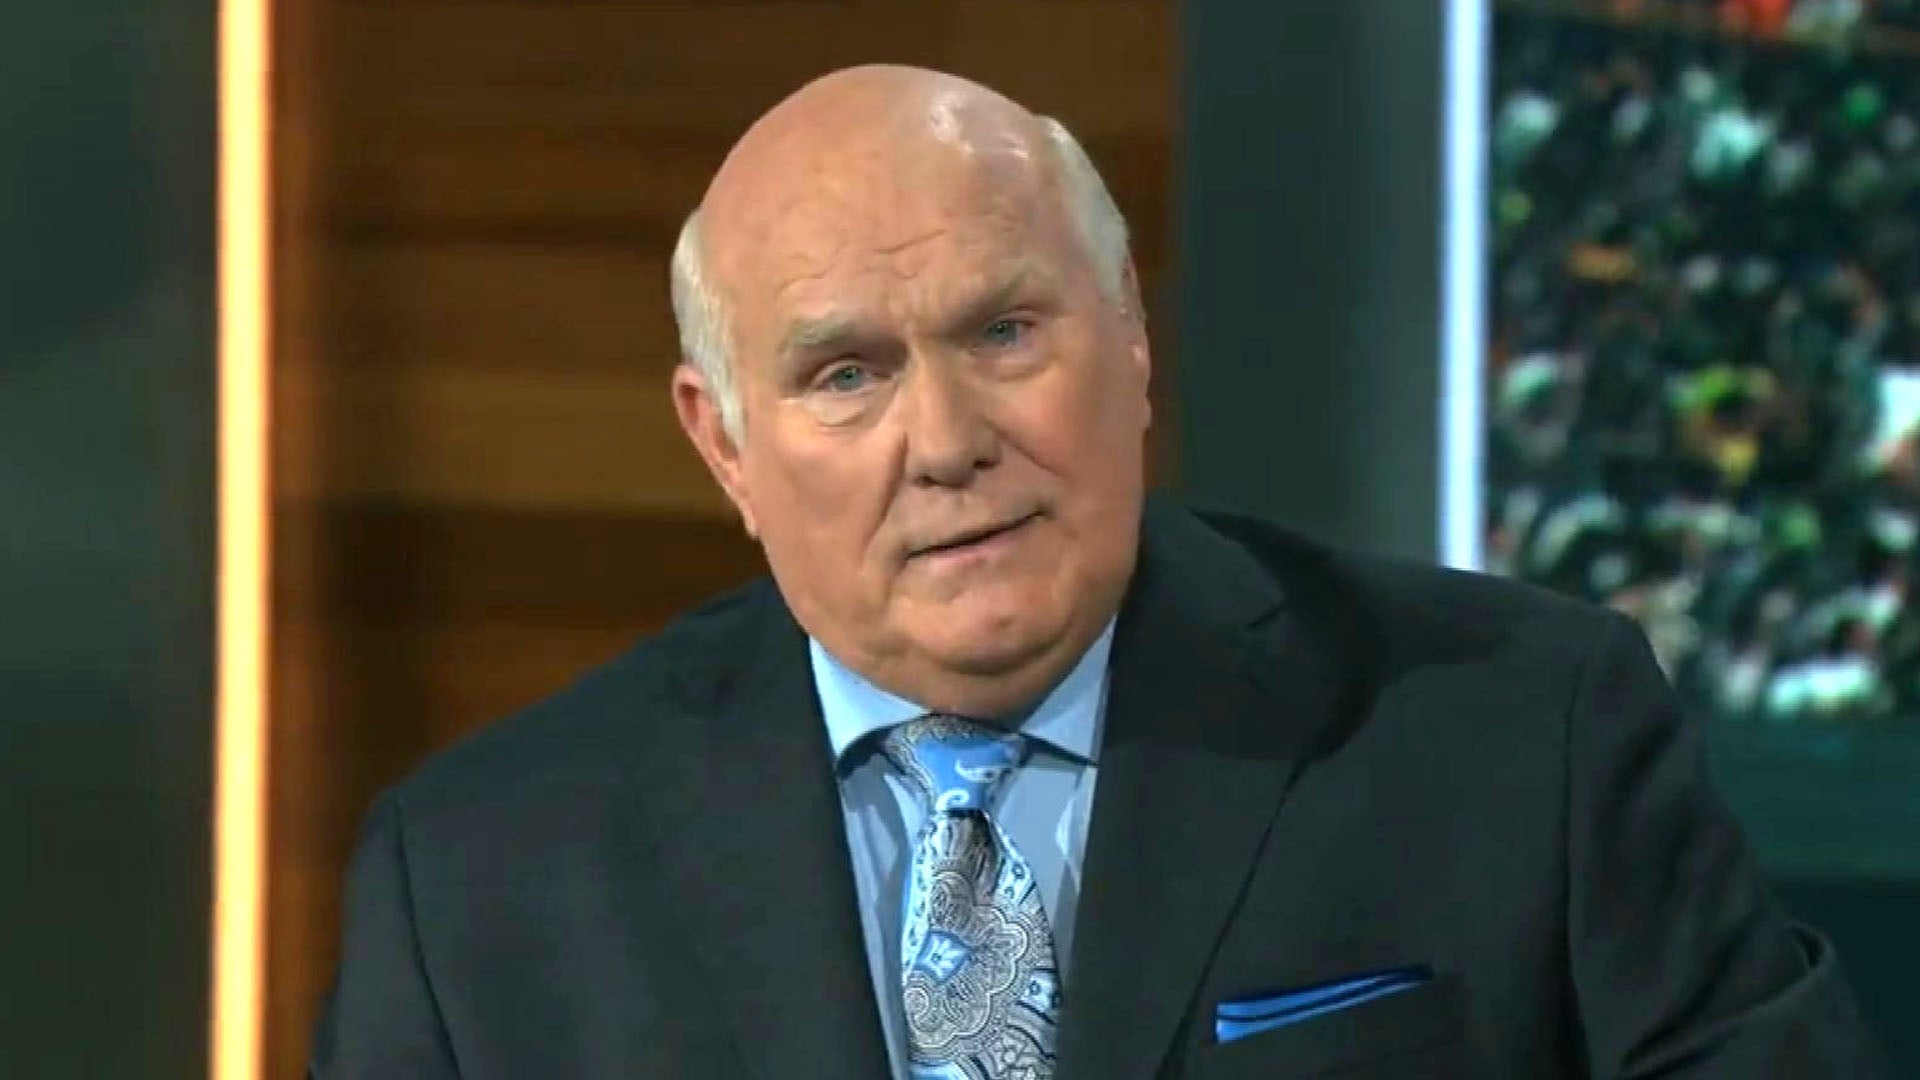 Terry Bradshaw Opens Up About Beating Cancer Following Concern From Fans